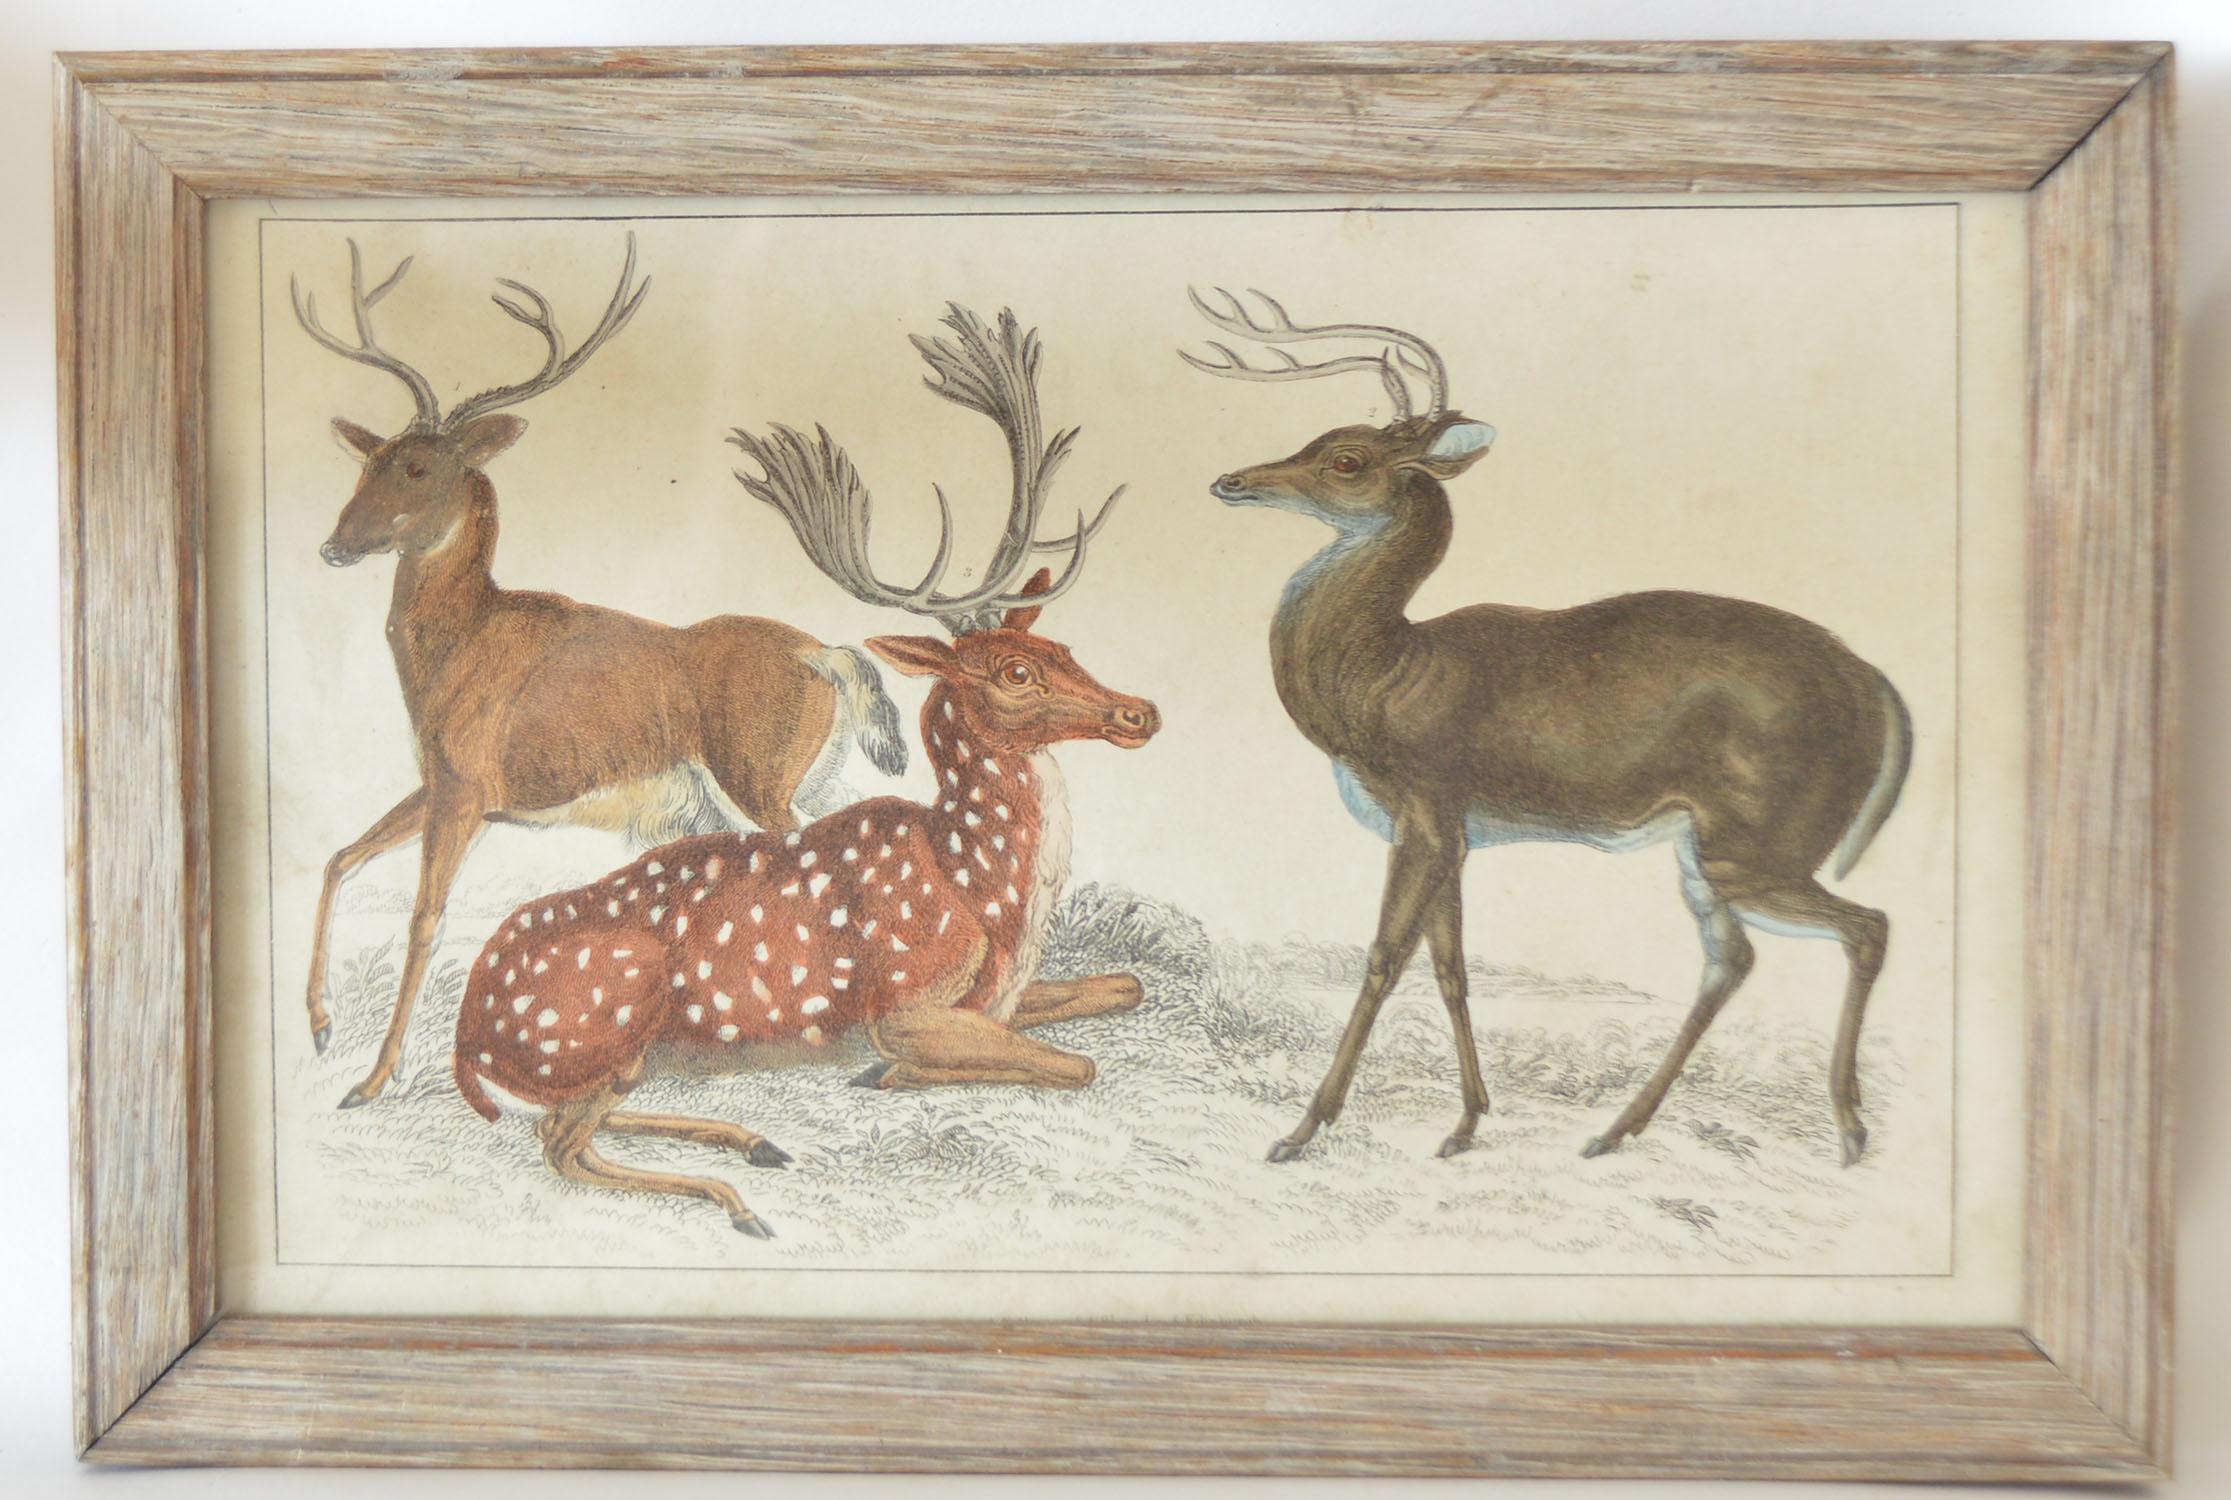 Great image of deer presented in a distressed antique oak frame.

Lithograph after Cpt. Brown with original hand color.

Published 1847.

Free shipping.
 

